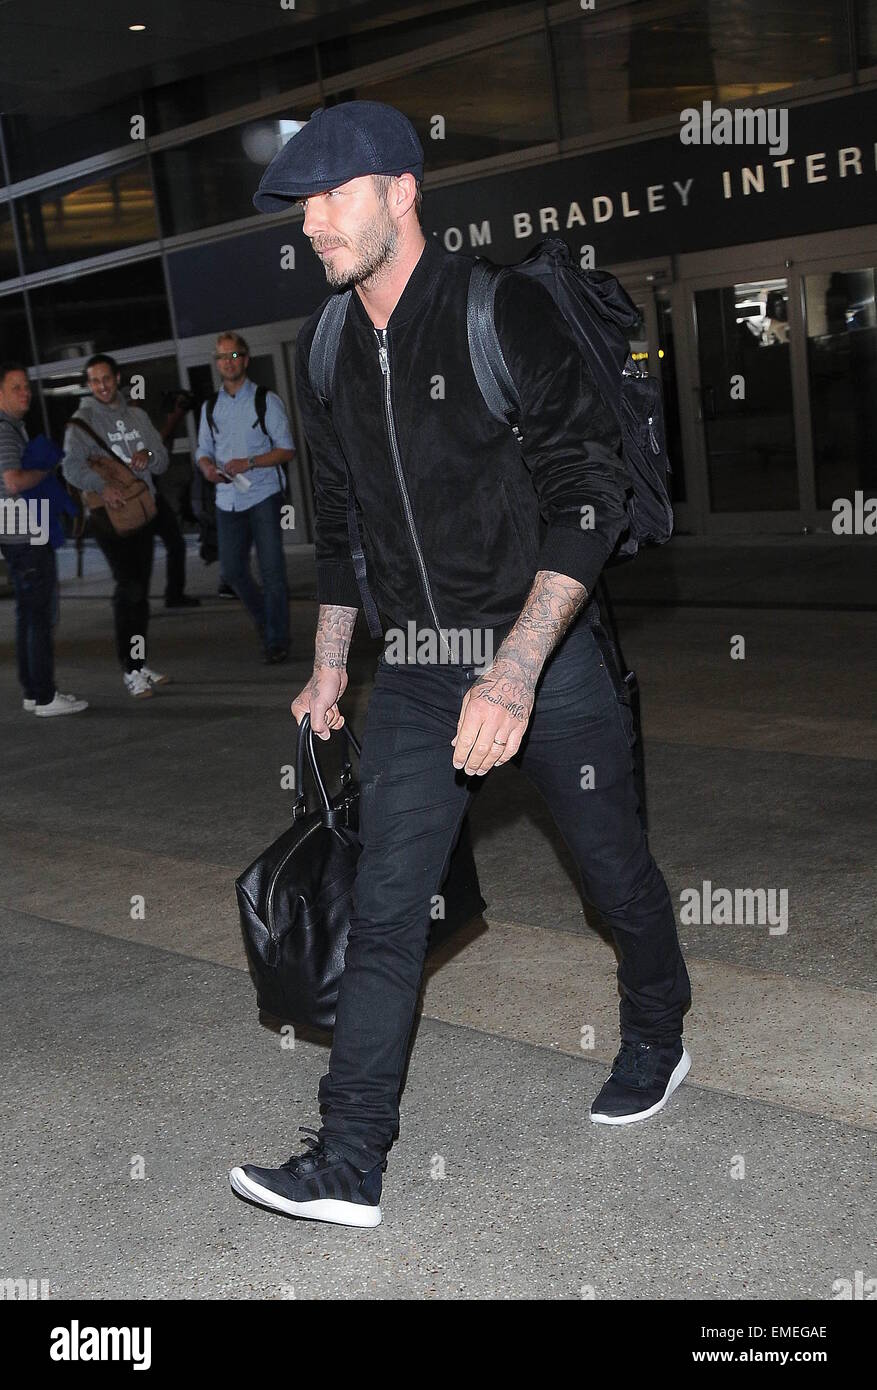 David Beckham arrives at Los Angeles International Airport wearing a flat cap, black bomber jacket and carrying luggage  Featuring: David Beckham Where: Los Angeles, California, United States When: 16 Oct 2014 Stock Photo